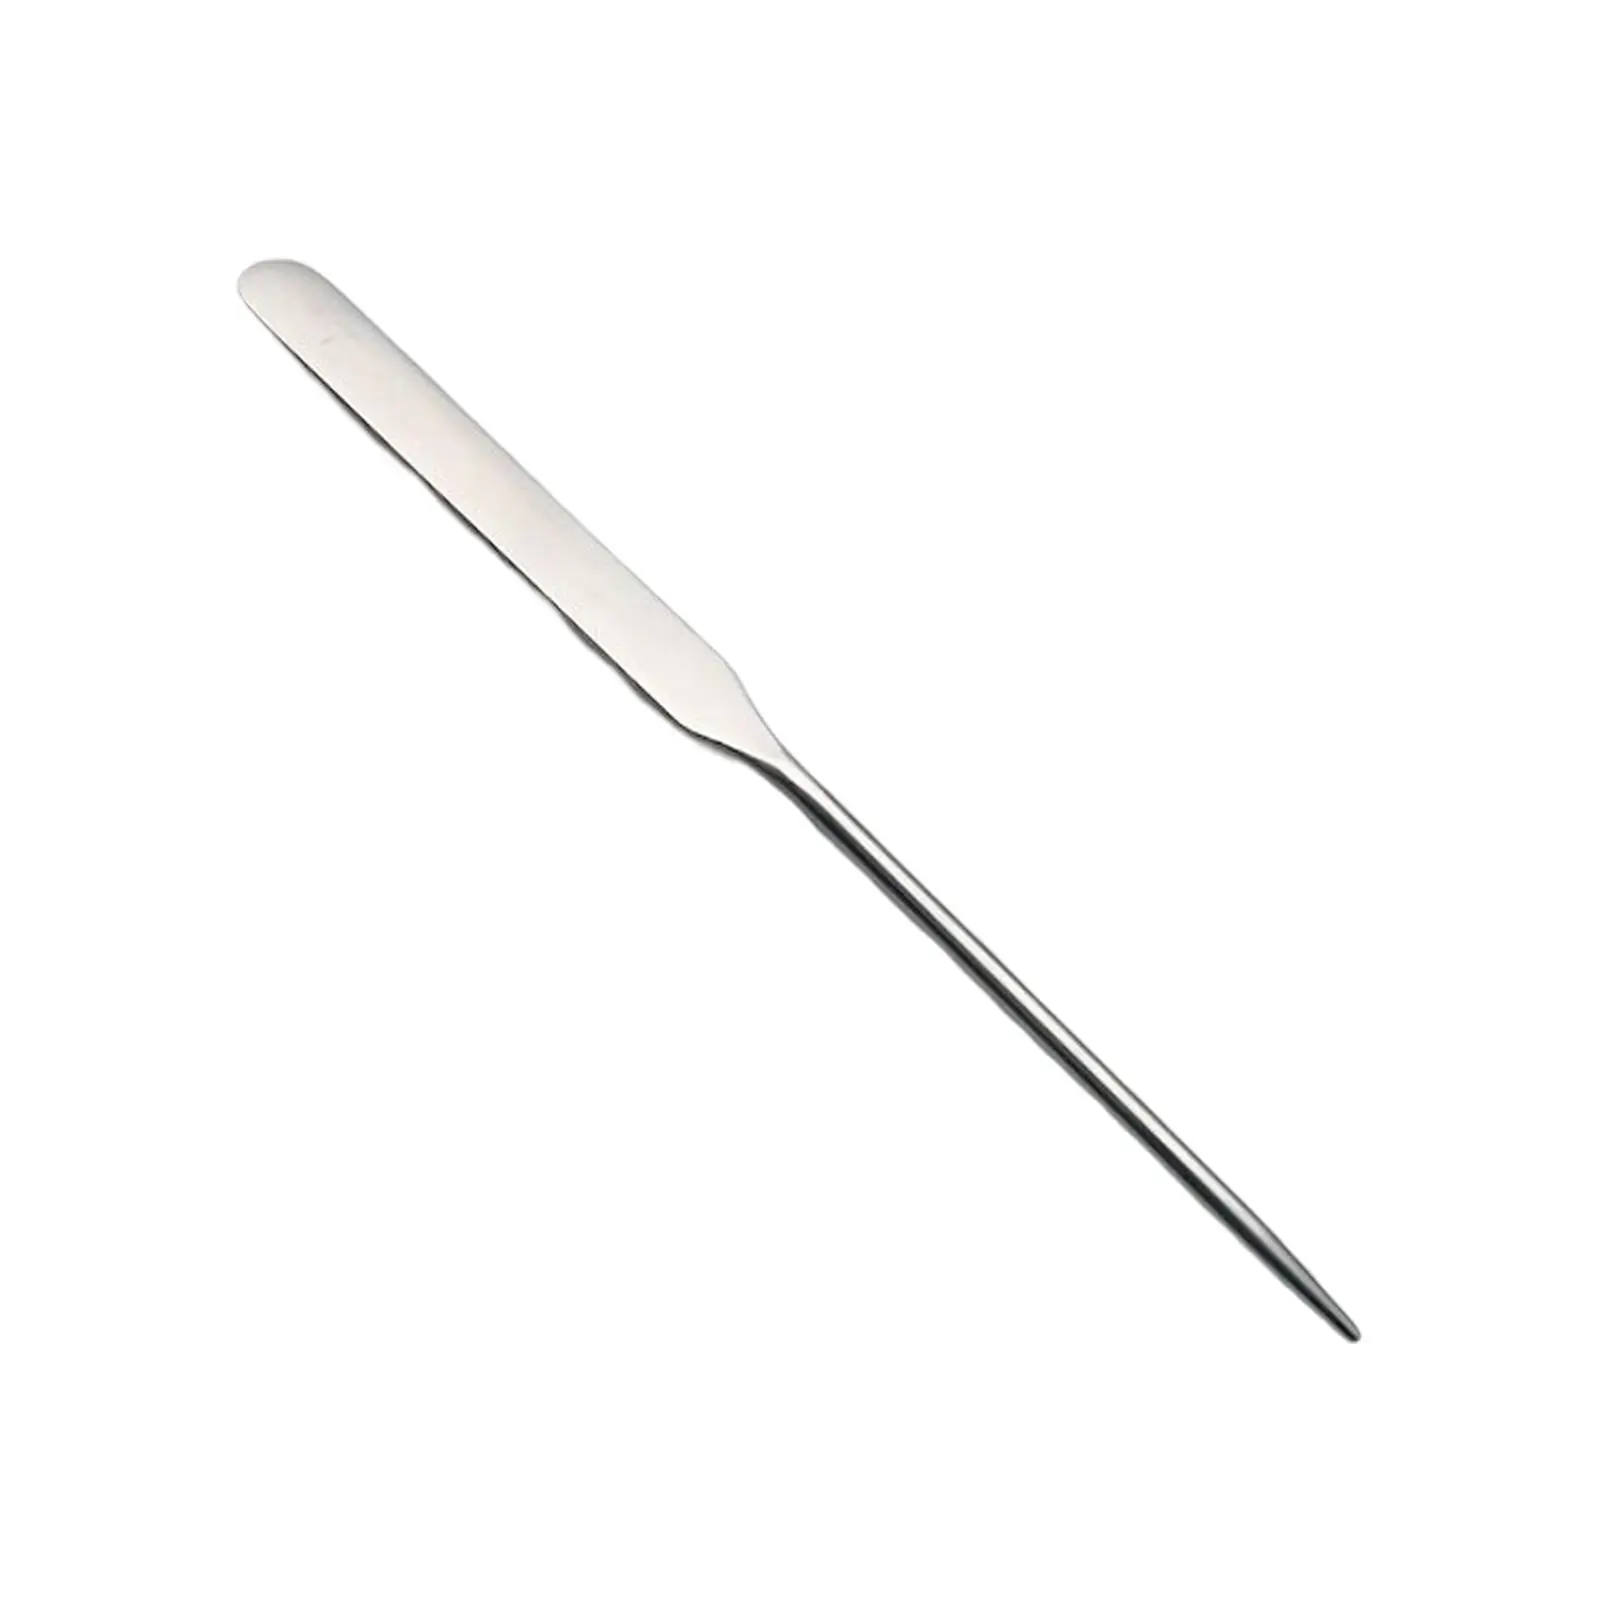 Stainless Steel Makeup Spatulas for Girls Women Facial Cream Mixing Stick Stick Rod for Palette